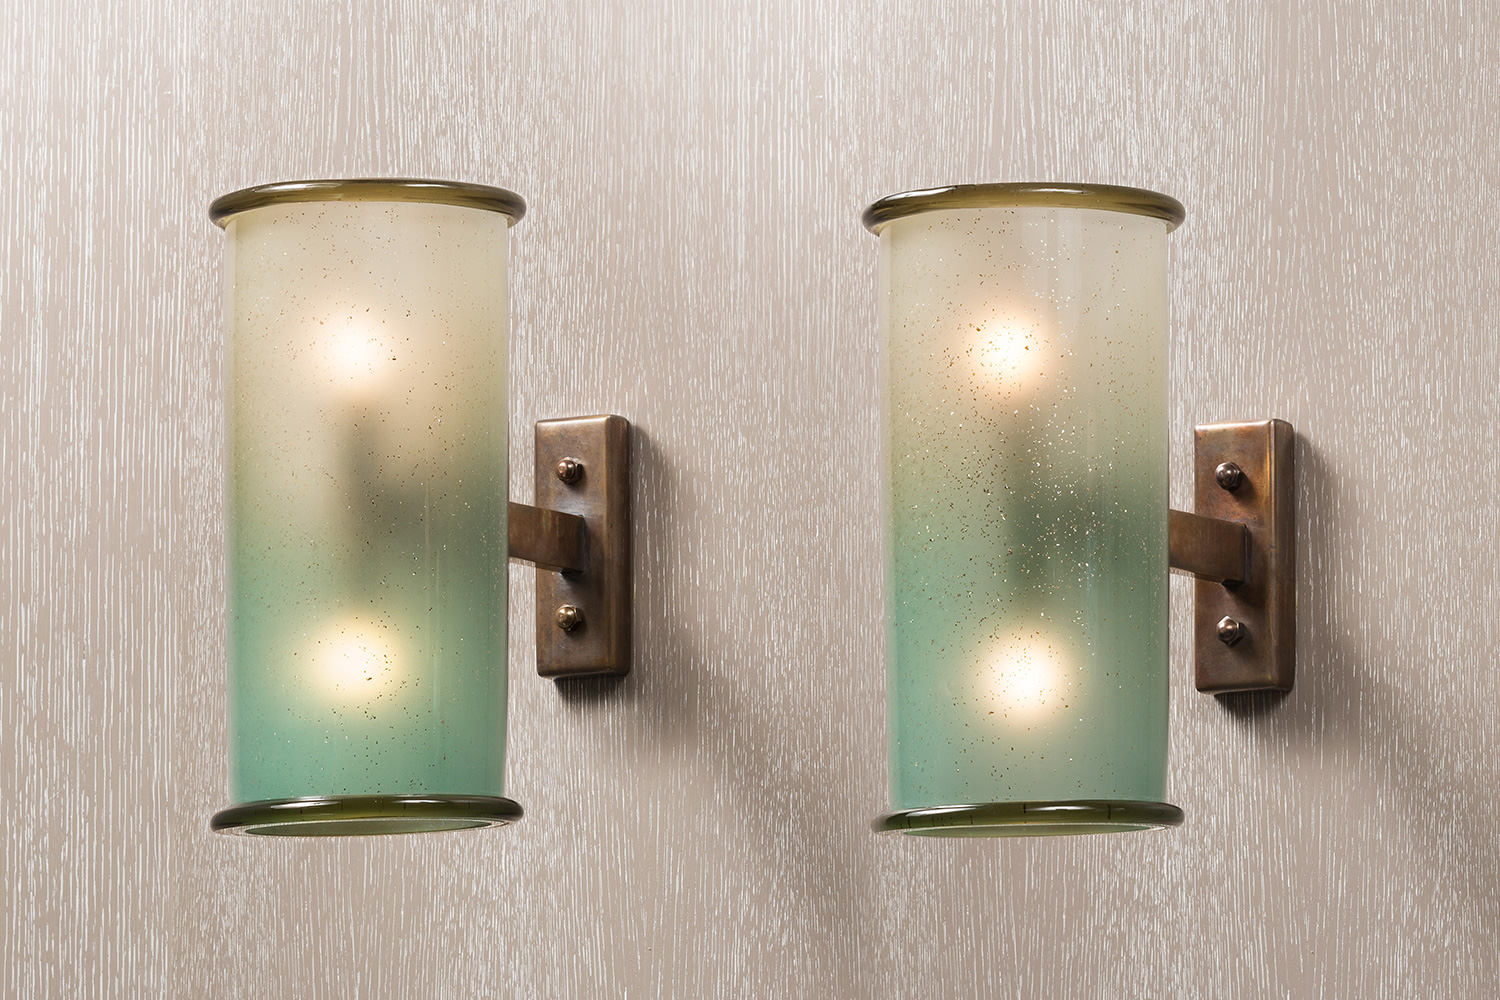 Pair of glass sconces